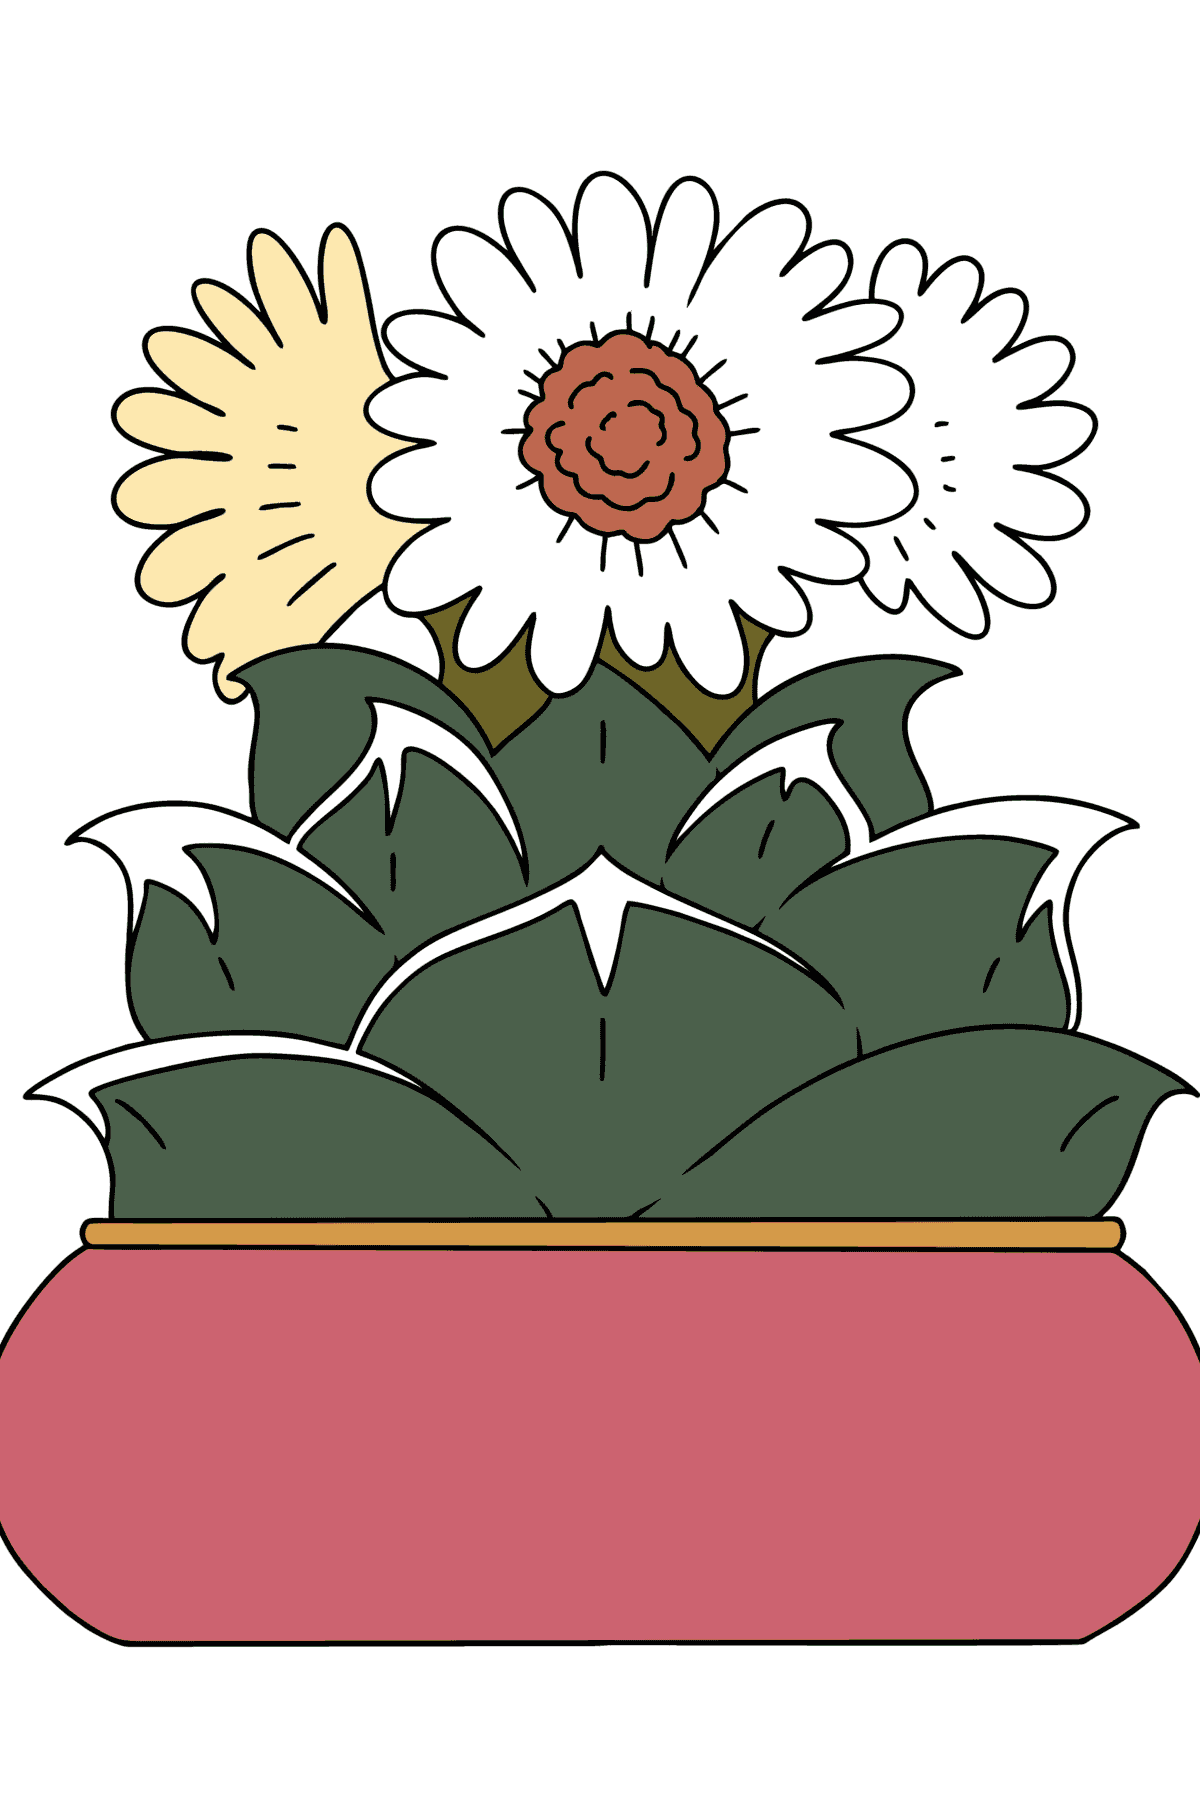 Echinocactus Grusonii coloring page - Coloring Pages for Kids